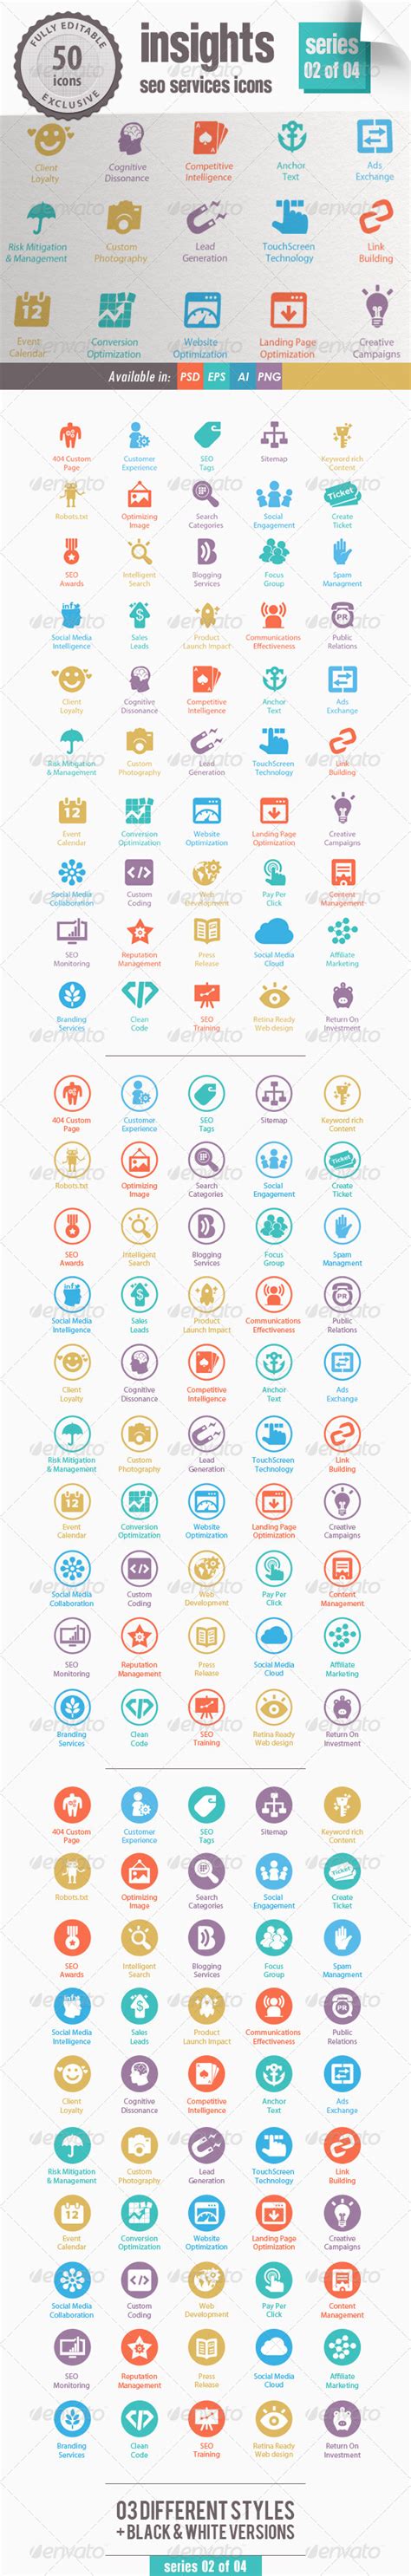 Insights Seo Services Icons Series 02 Of 04 By Kh2838 Graphicriver